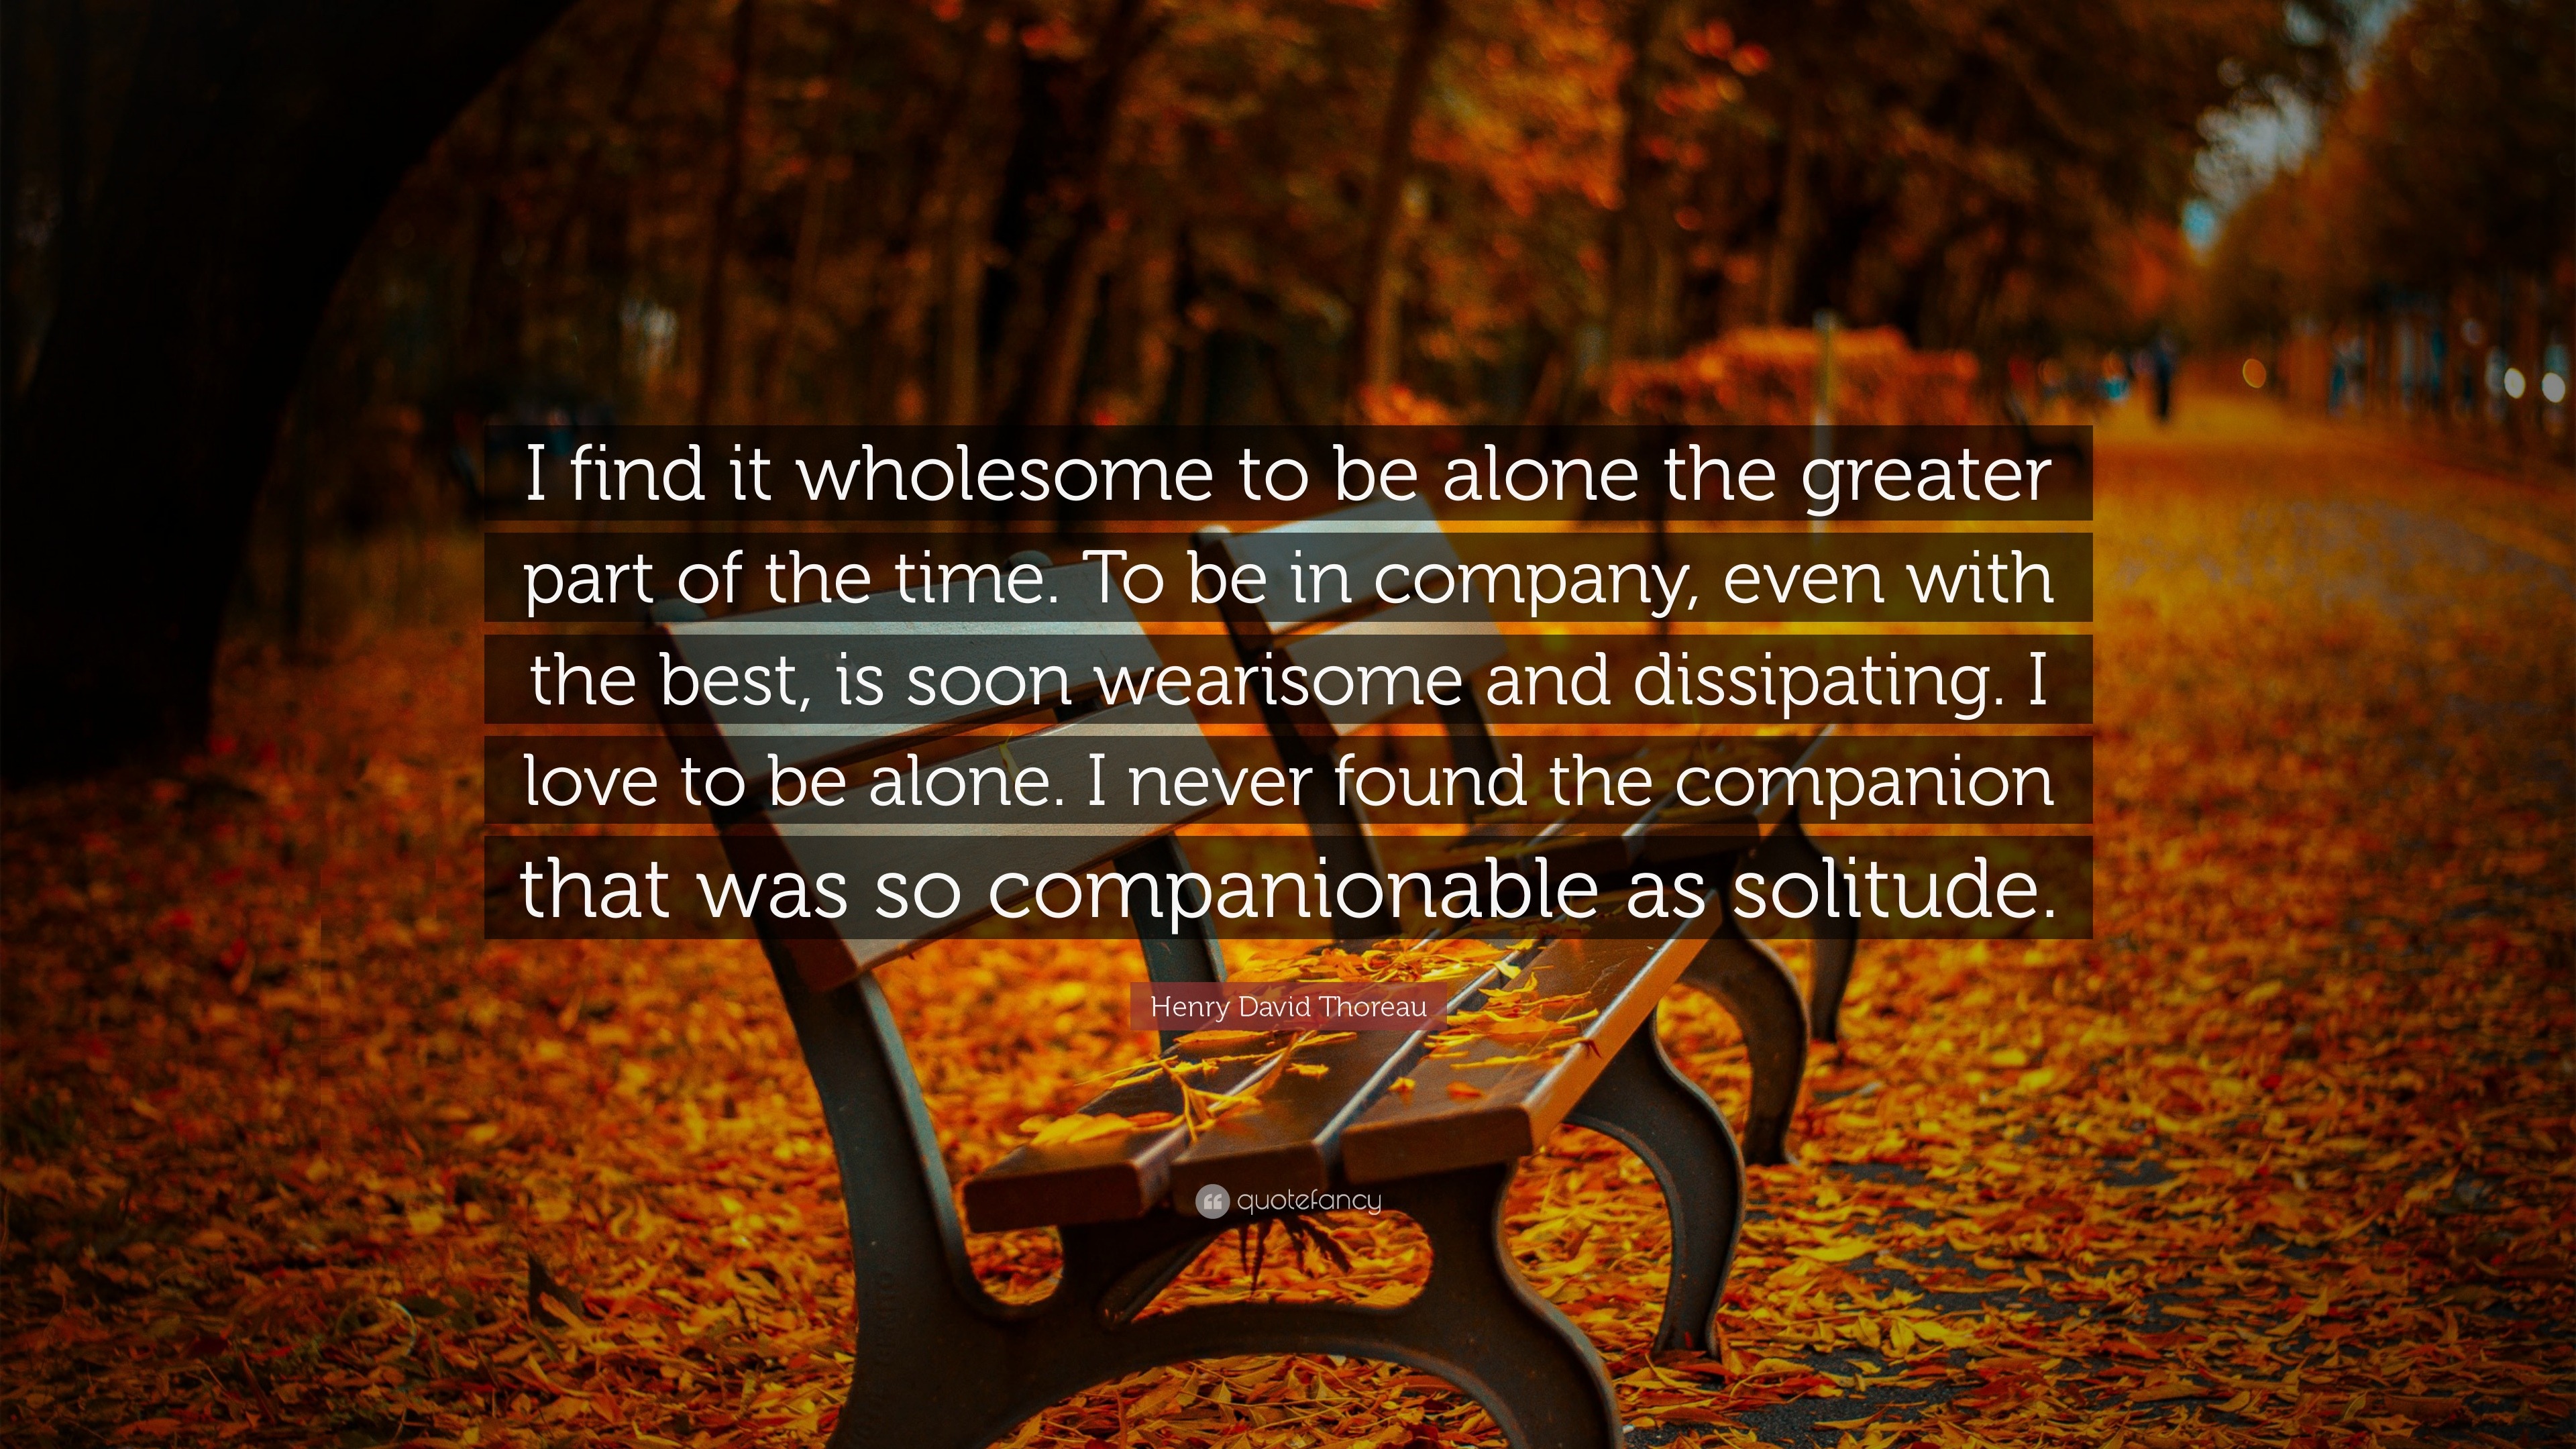 Them of life meaning of. The longing Shade. The best time to Plant a Tree quote. The Loneliest people quote. Quotefancy.